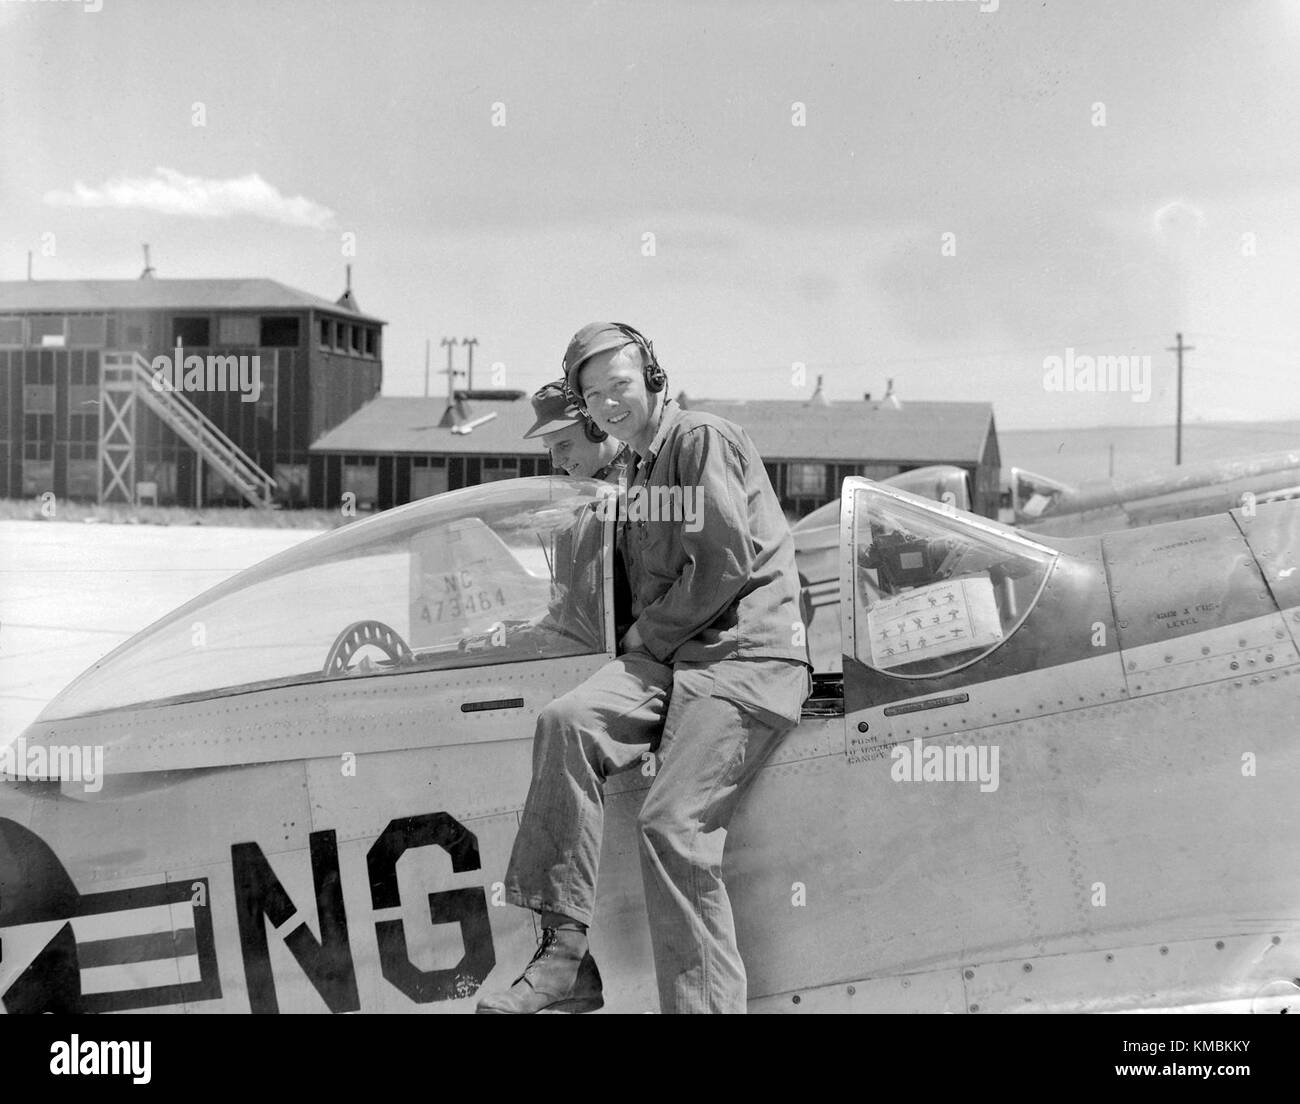 Thornton 'Beck' Becklund, of the 178th Fighter Squadron, North Dakota Air National Guard, smiles as he sits on an F-51 Mustang aircraft during a summer camp annual training period at Casper, Wyoming, 1949. Becklund went on to become the 119th Fighter Group commander in 1981 and was promoted to brigadier general as the N.D. Air National Guard chief of staff in 1988. Stock Photo